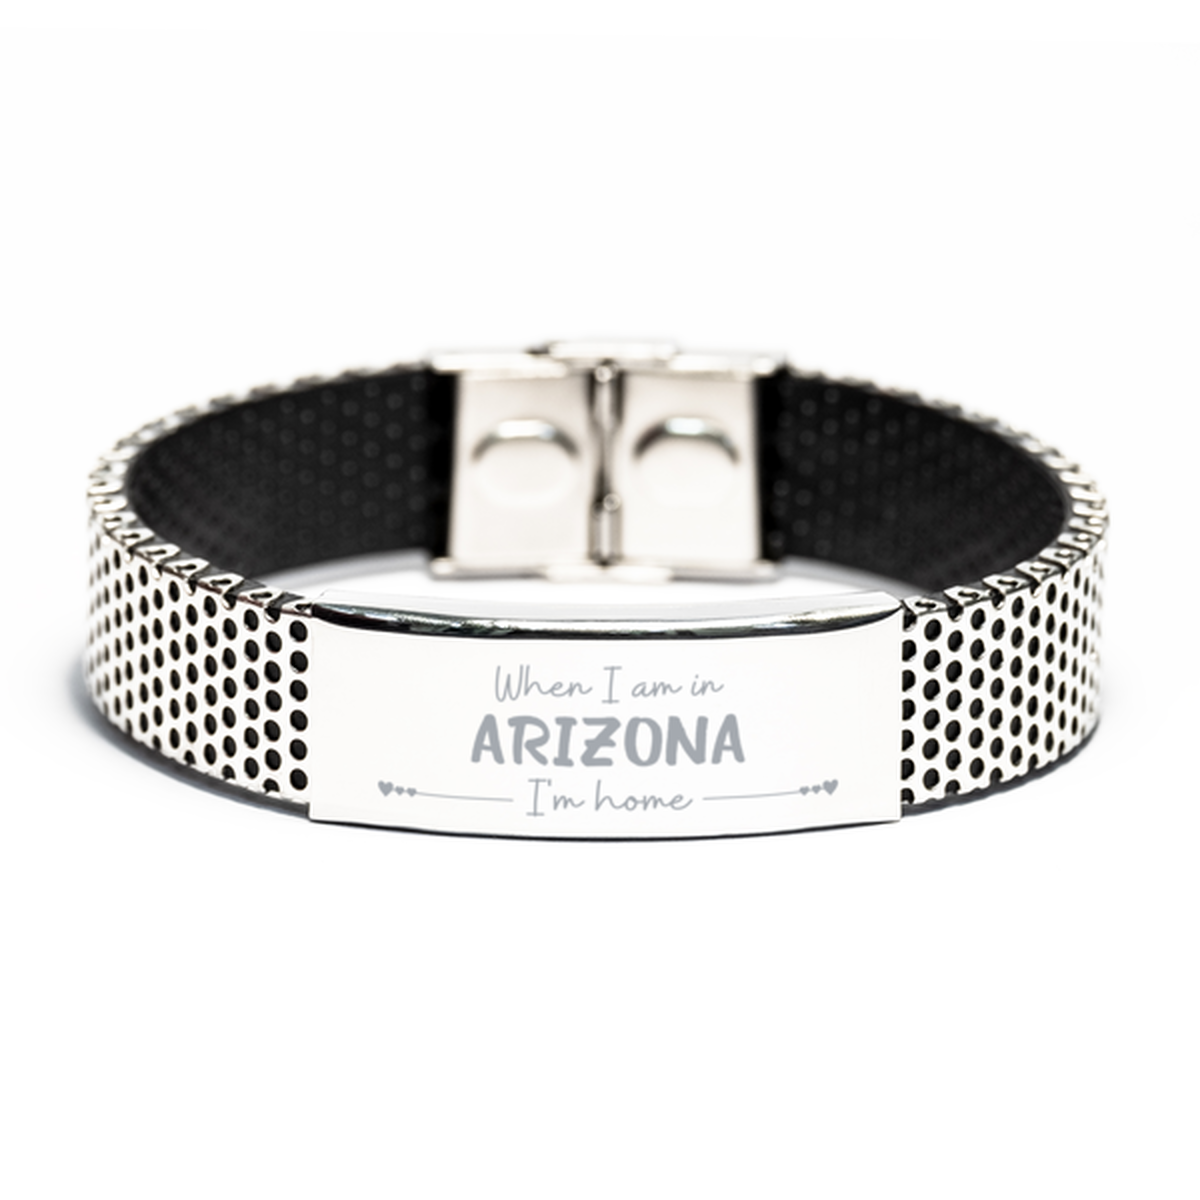 When I am in Arizona I'm home Stainless Steel Bracelet, Cheap Gifts For Arizona, State Arizona Birthday Gifts for Friends Coworker